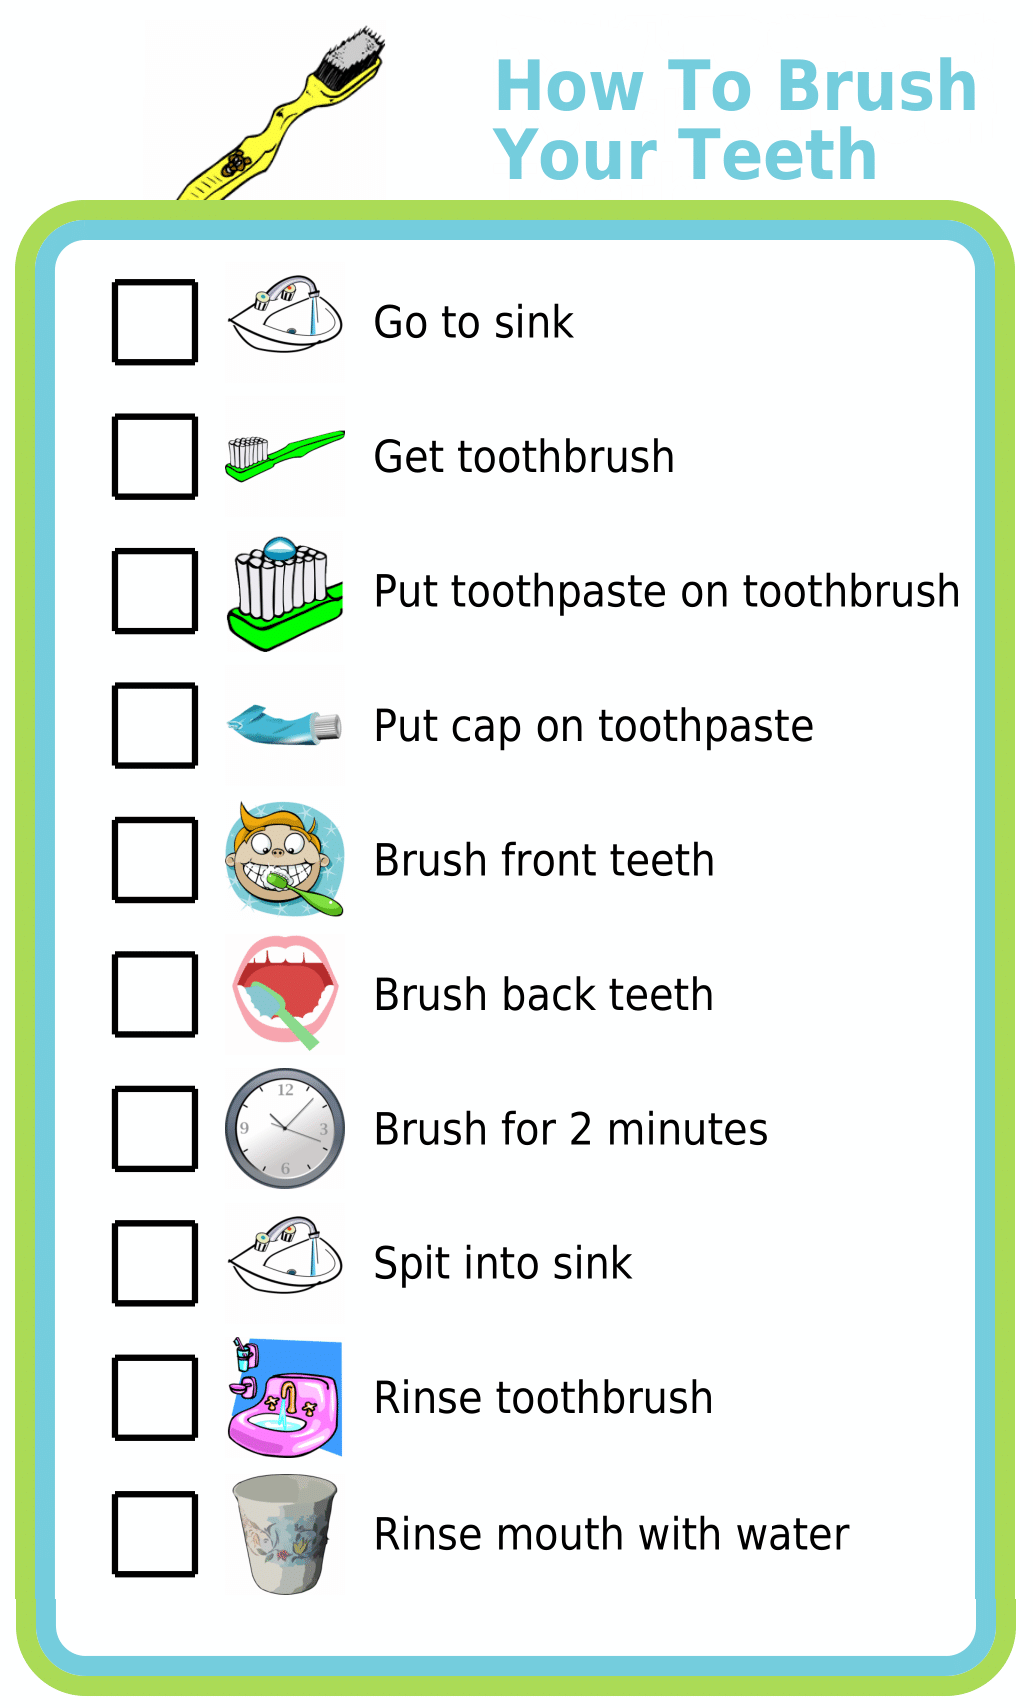 Picture checklist showing the steps for how to brush teeth